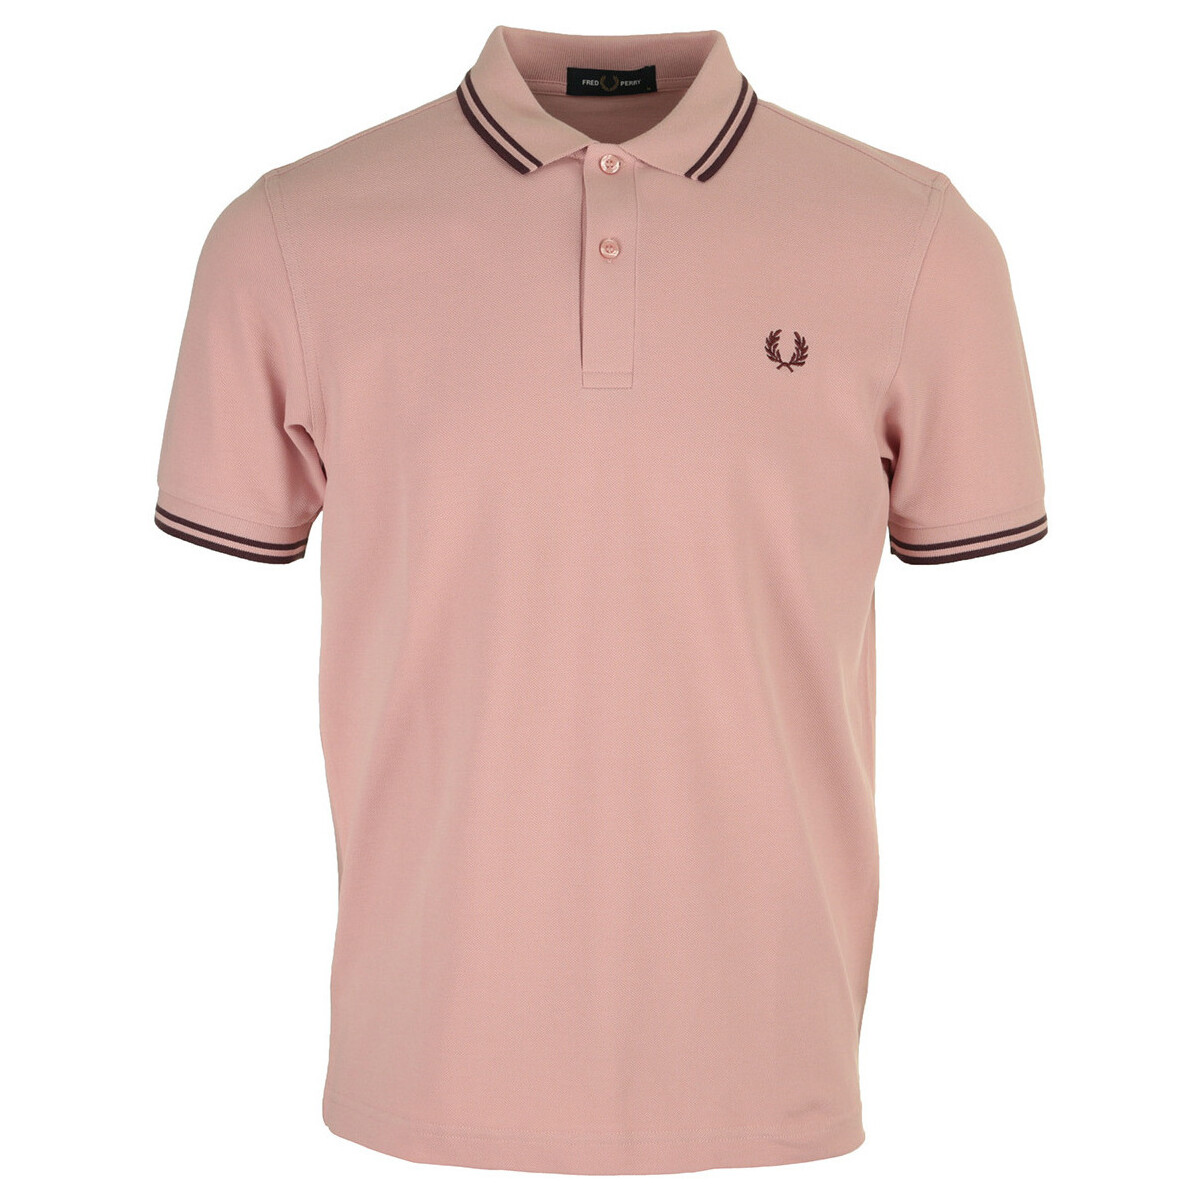 textil Hombre Tops y Camisetas Fred Perry Twin Tipped Rojo